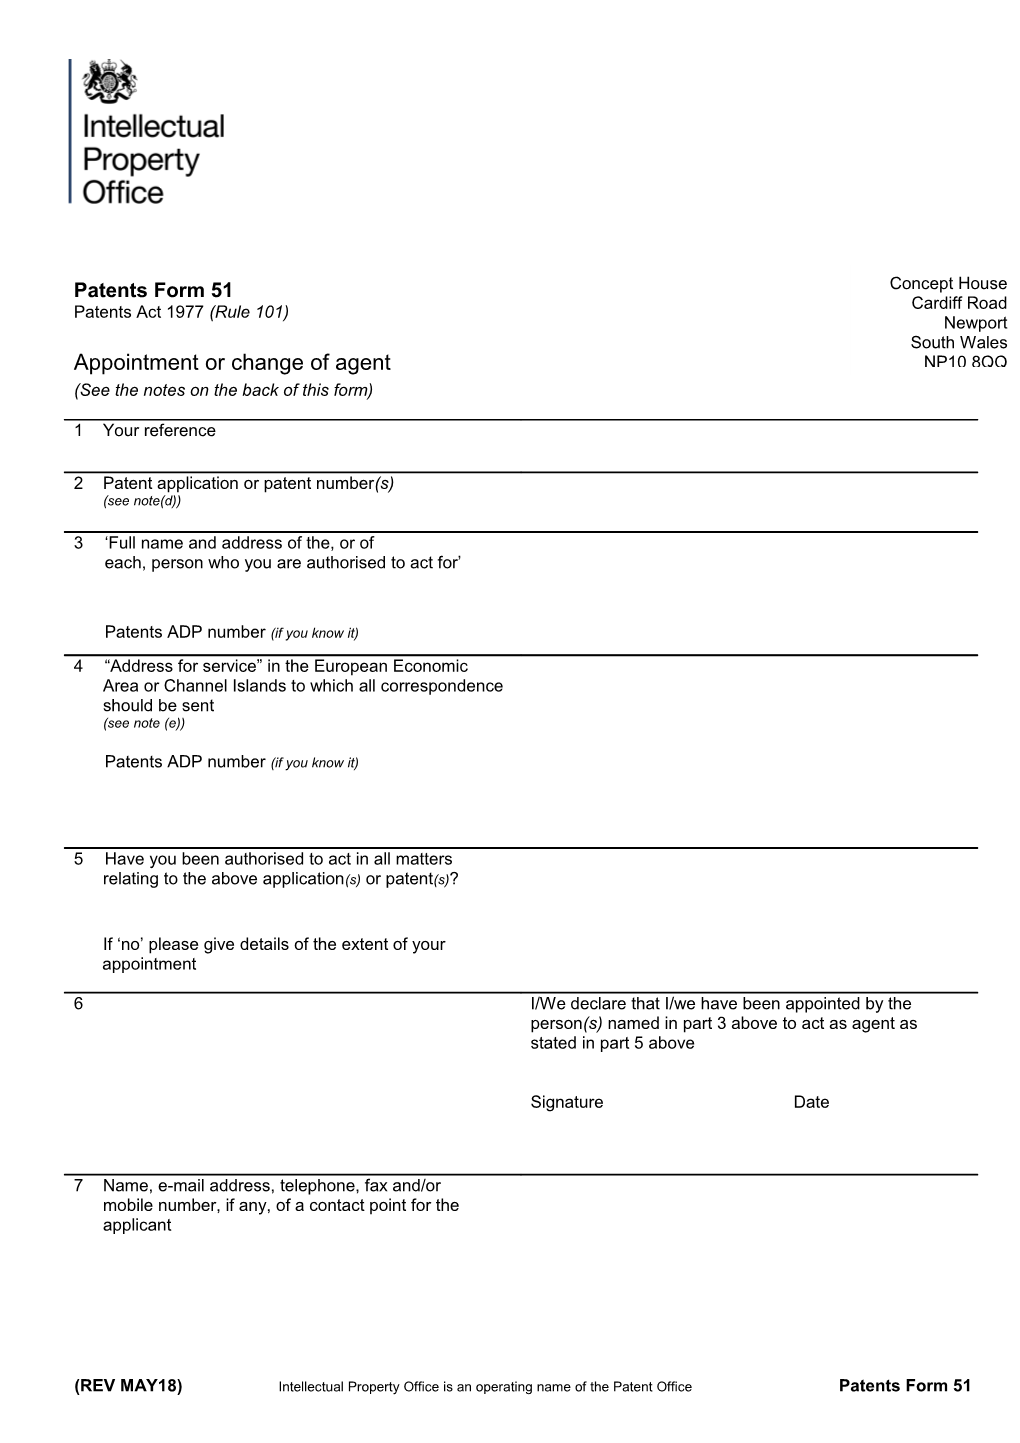 See the Notes on the Back of This Form